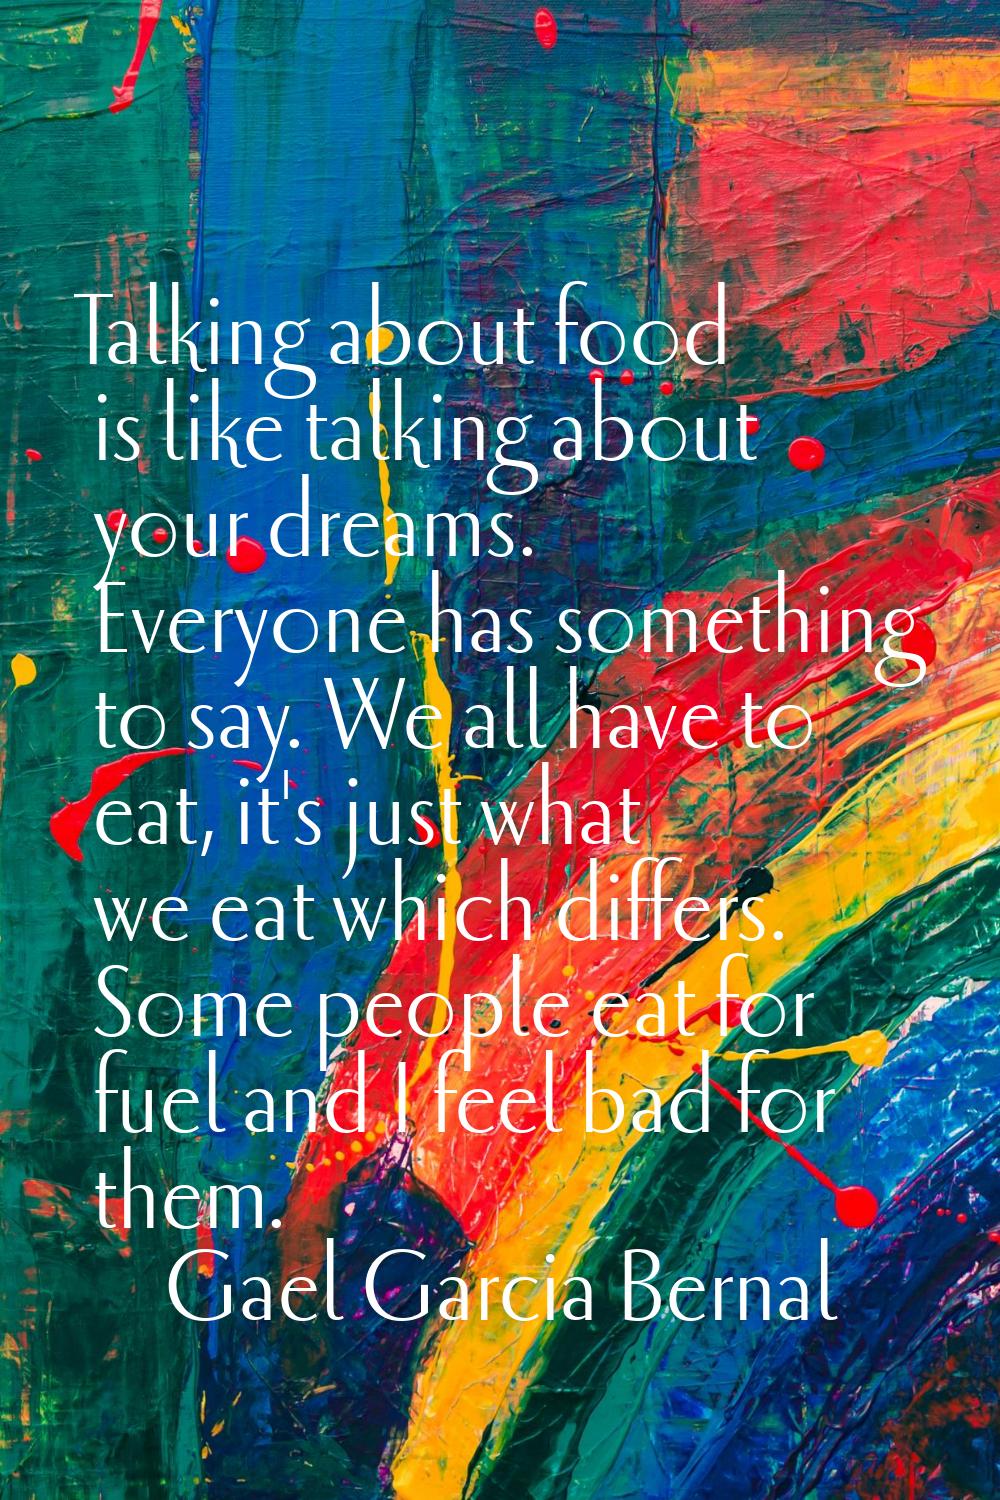 Talking about food is like talking about your dreams. Everyone has something to say. We all have to